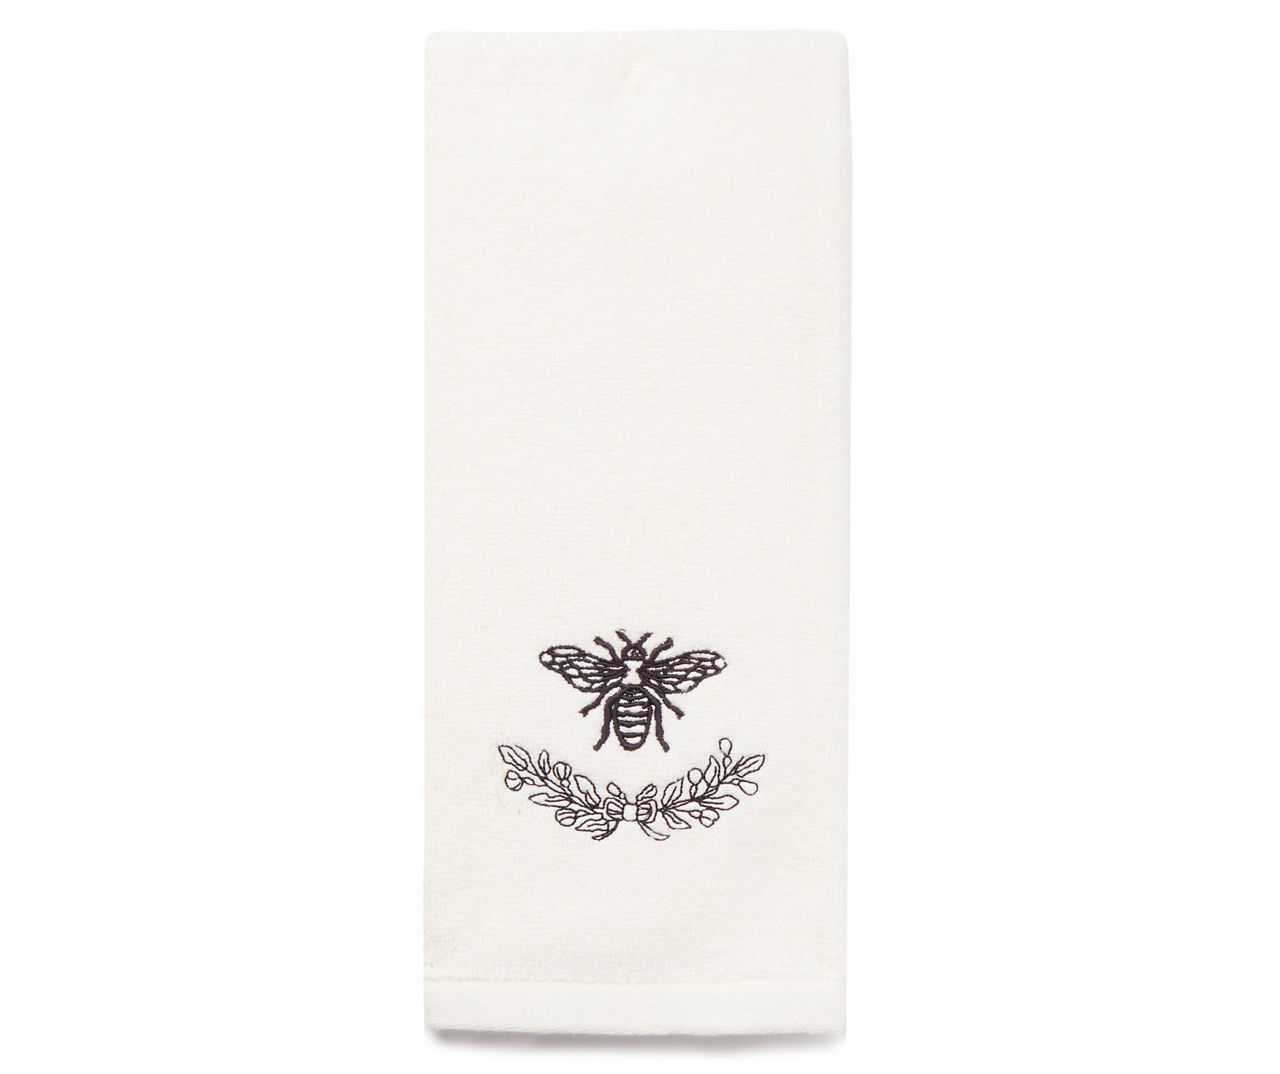 Broyhill White Winding Lines Hand Towel